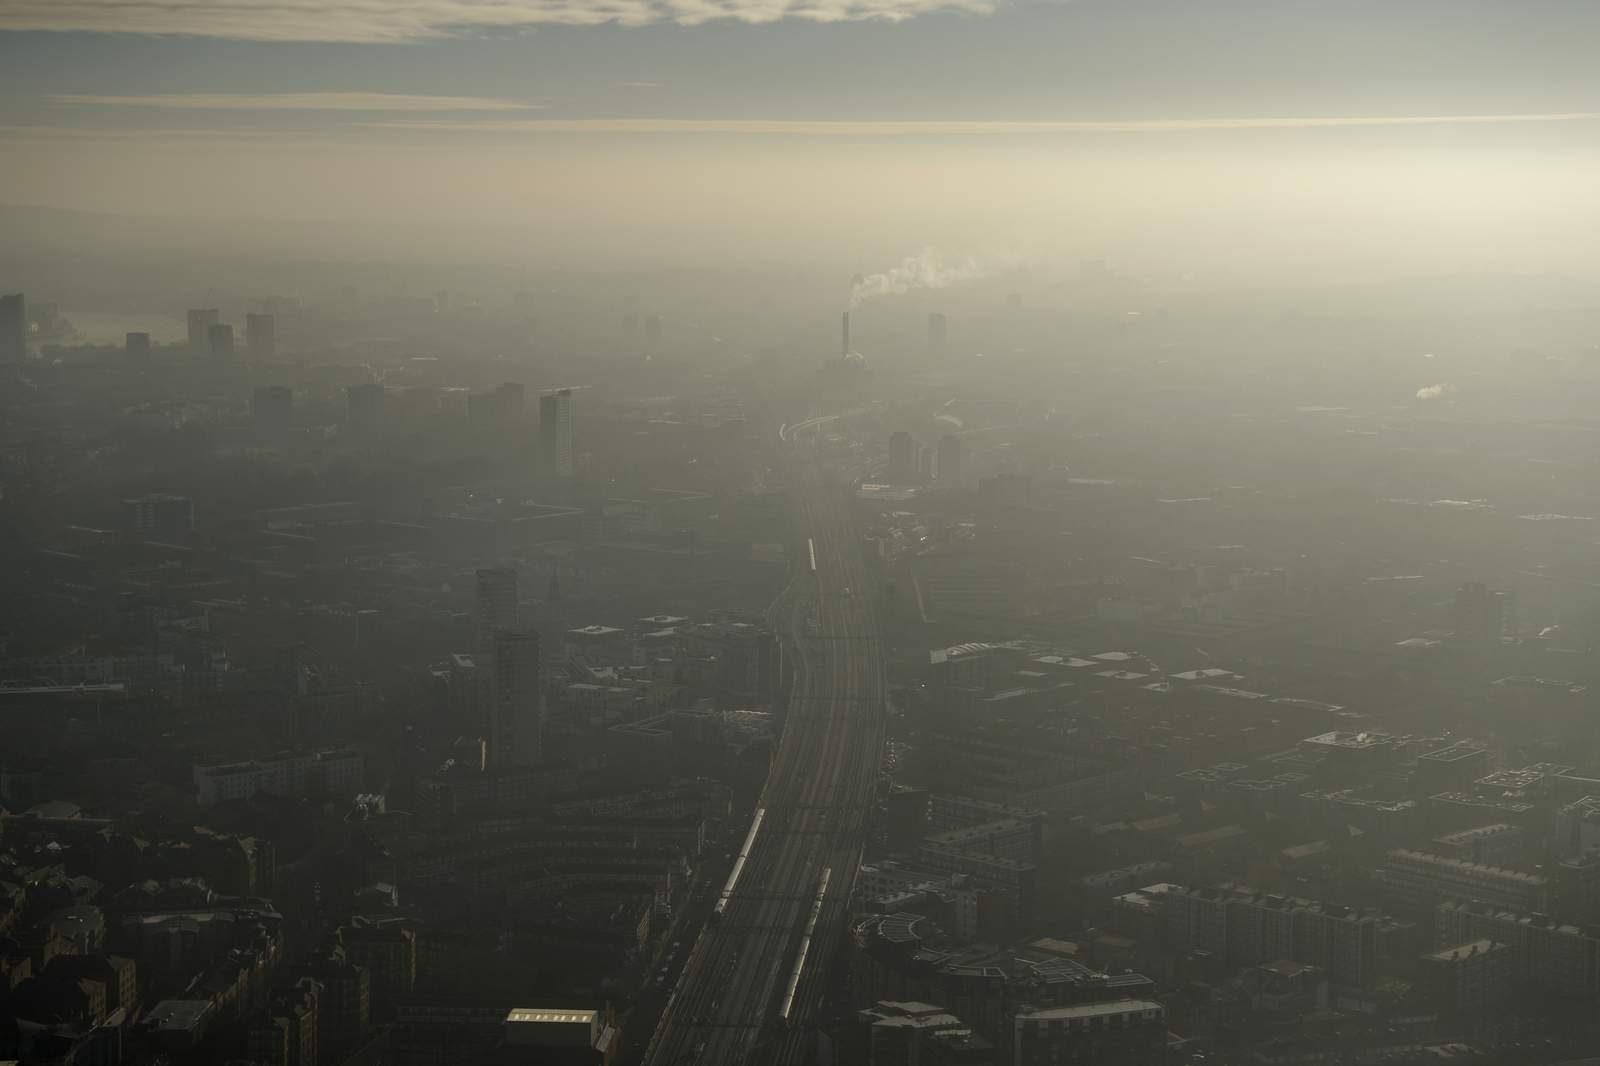 UK: Air pollution listed as cause of 9-year-old's death